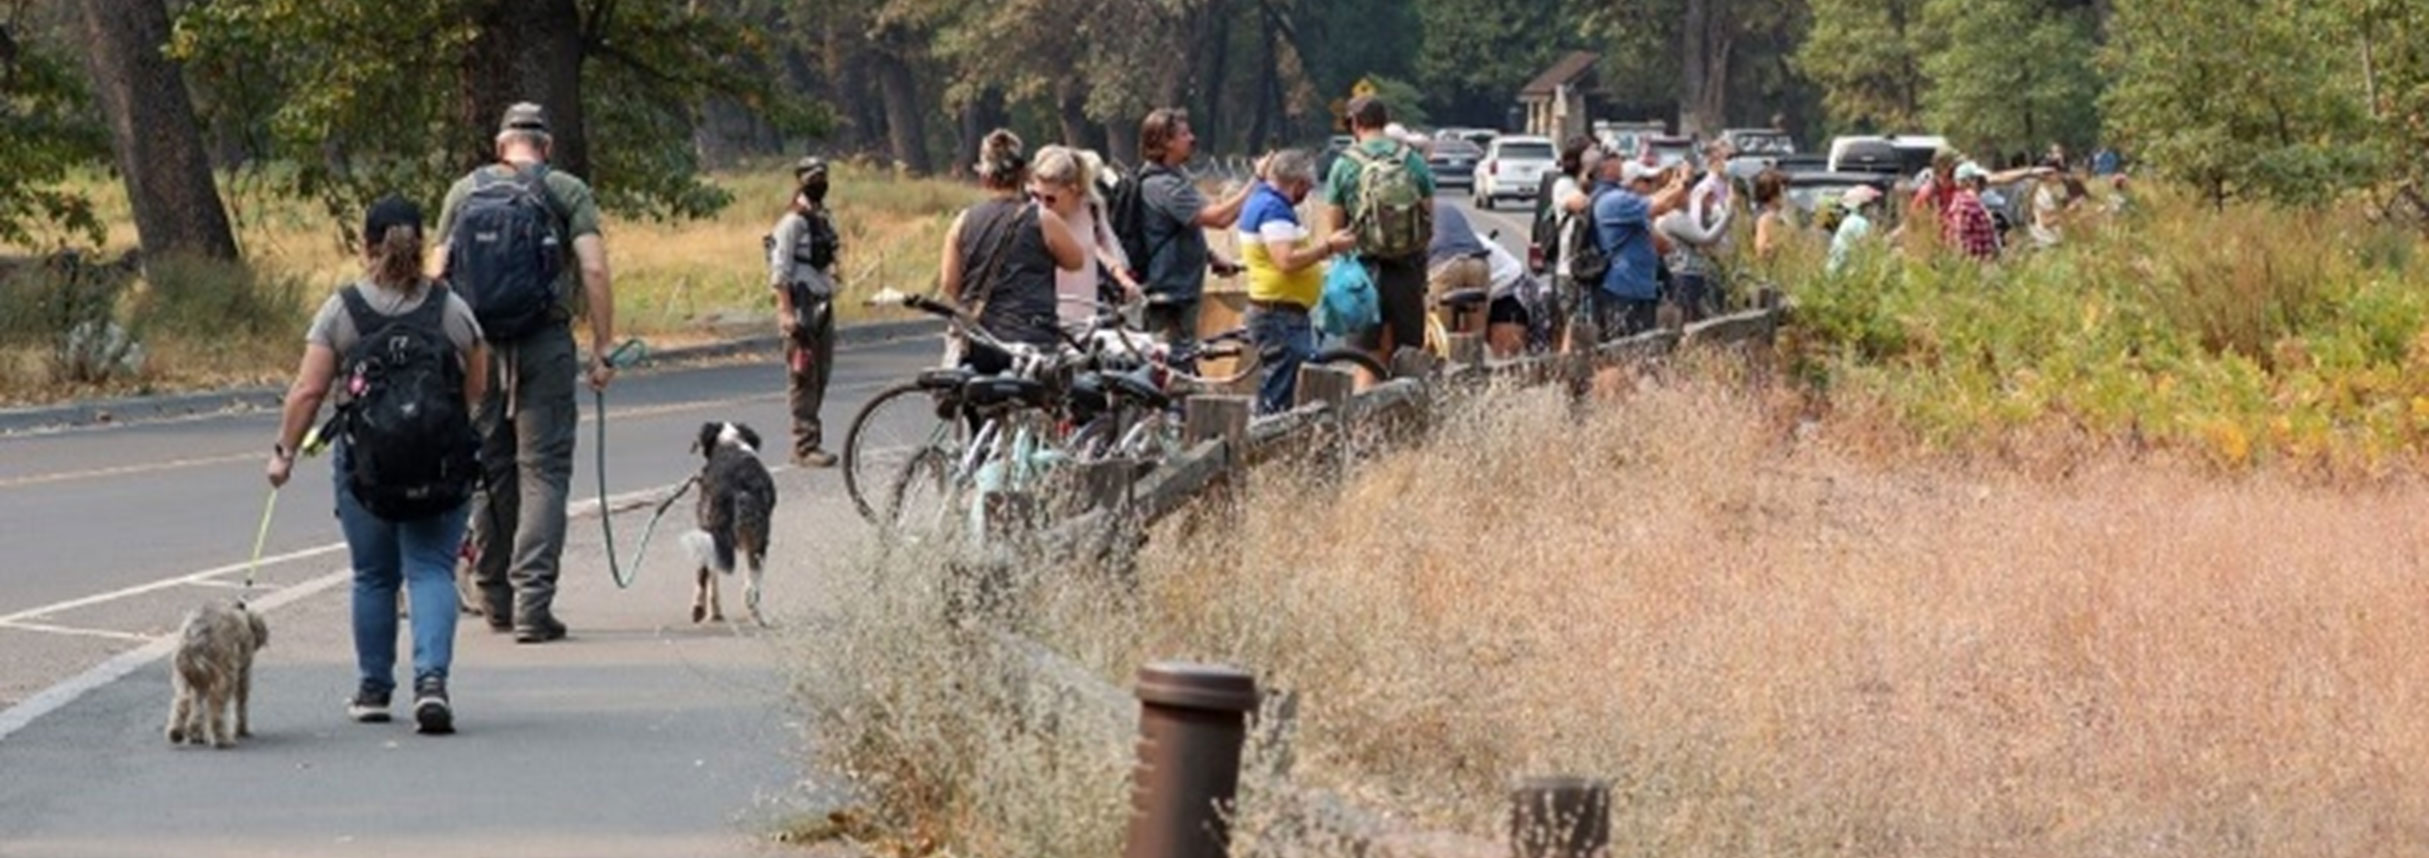 Crowd of people standing on bike path looking off into the woods